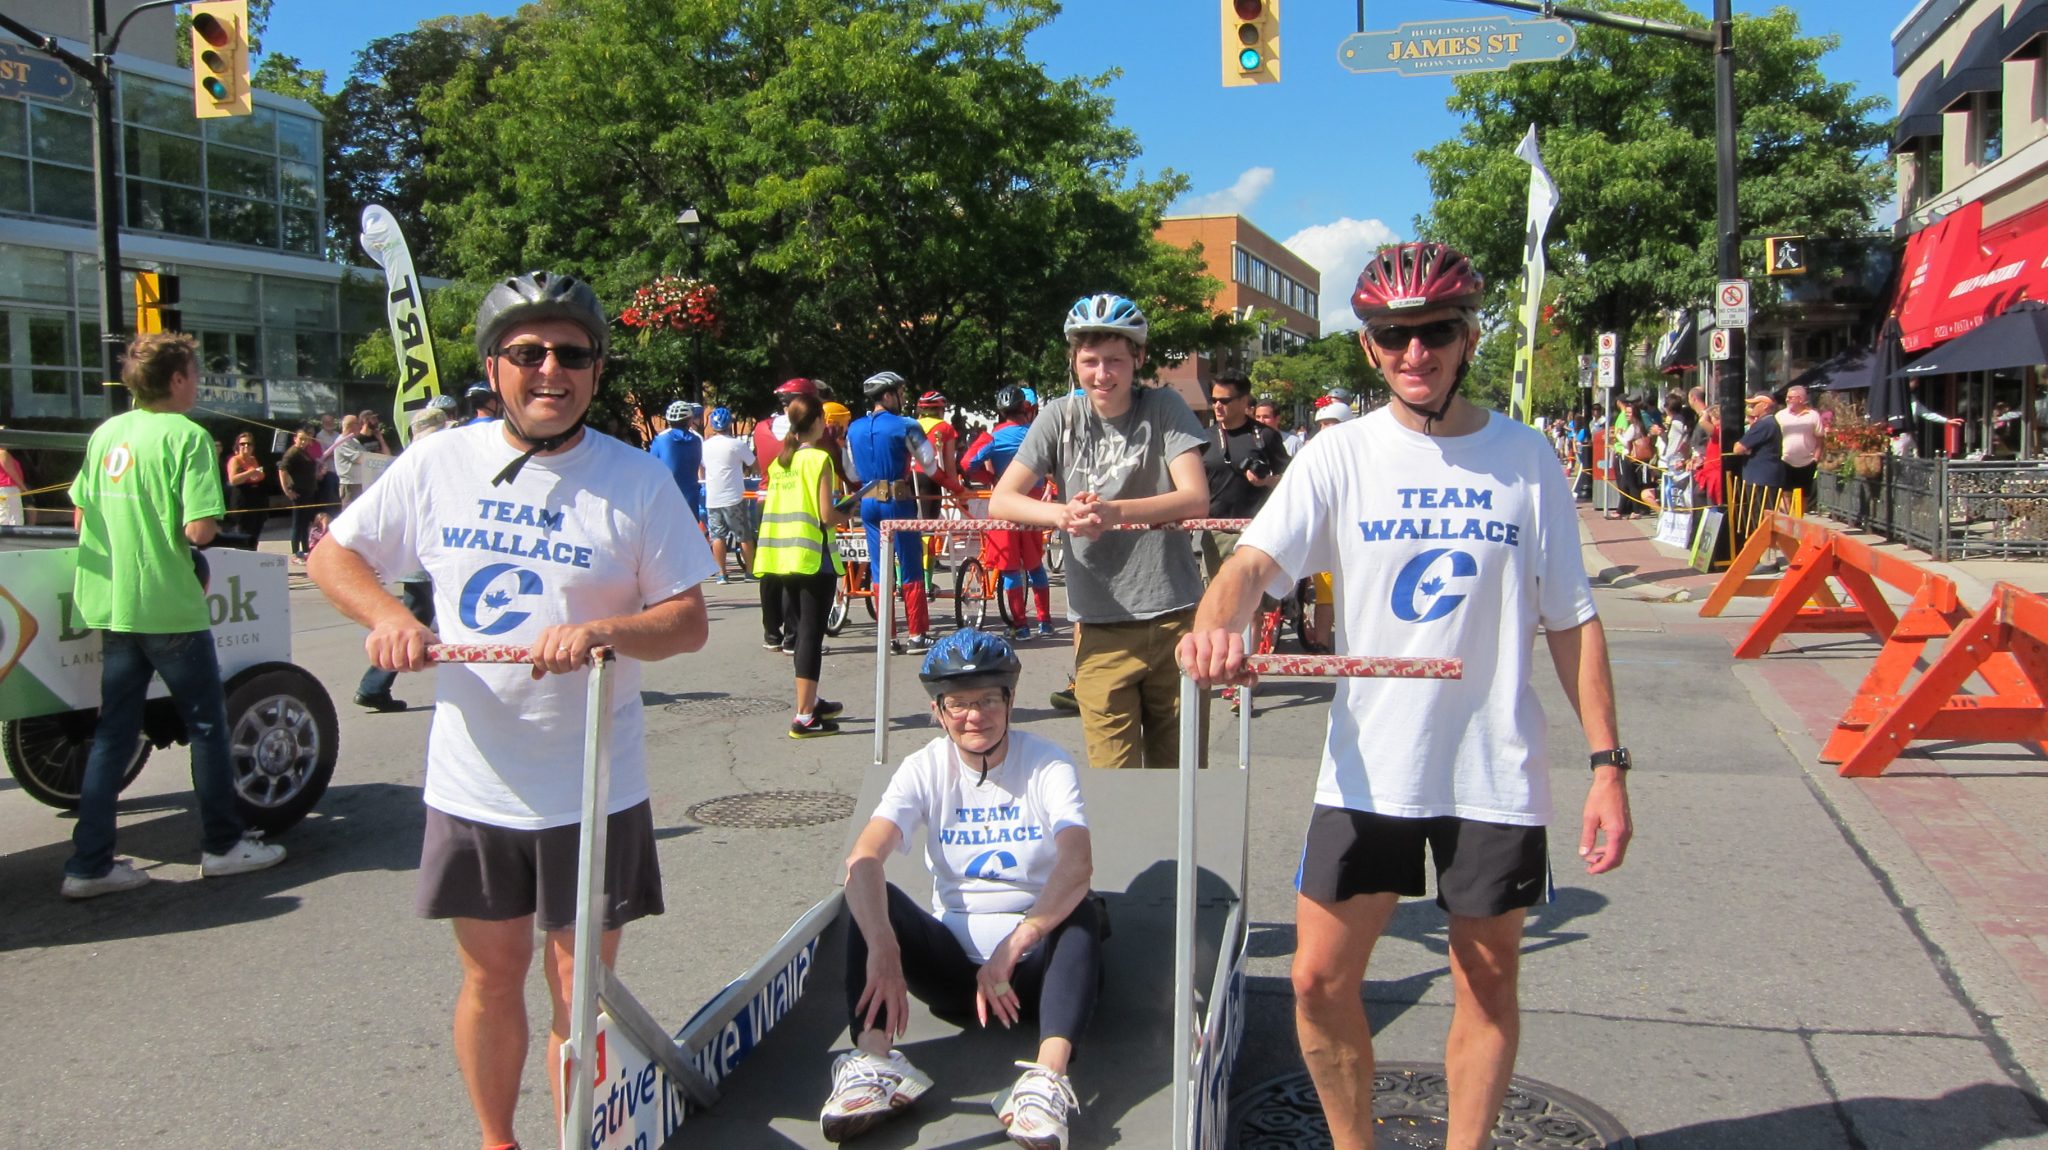 Team Wallace in 2014 Amazing Bed Race